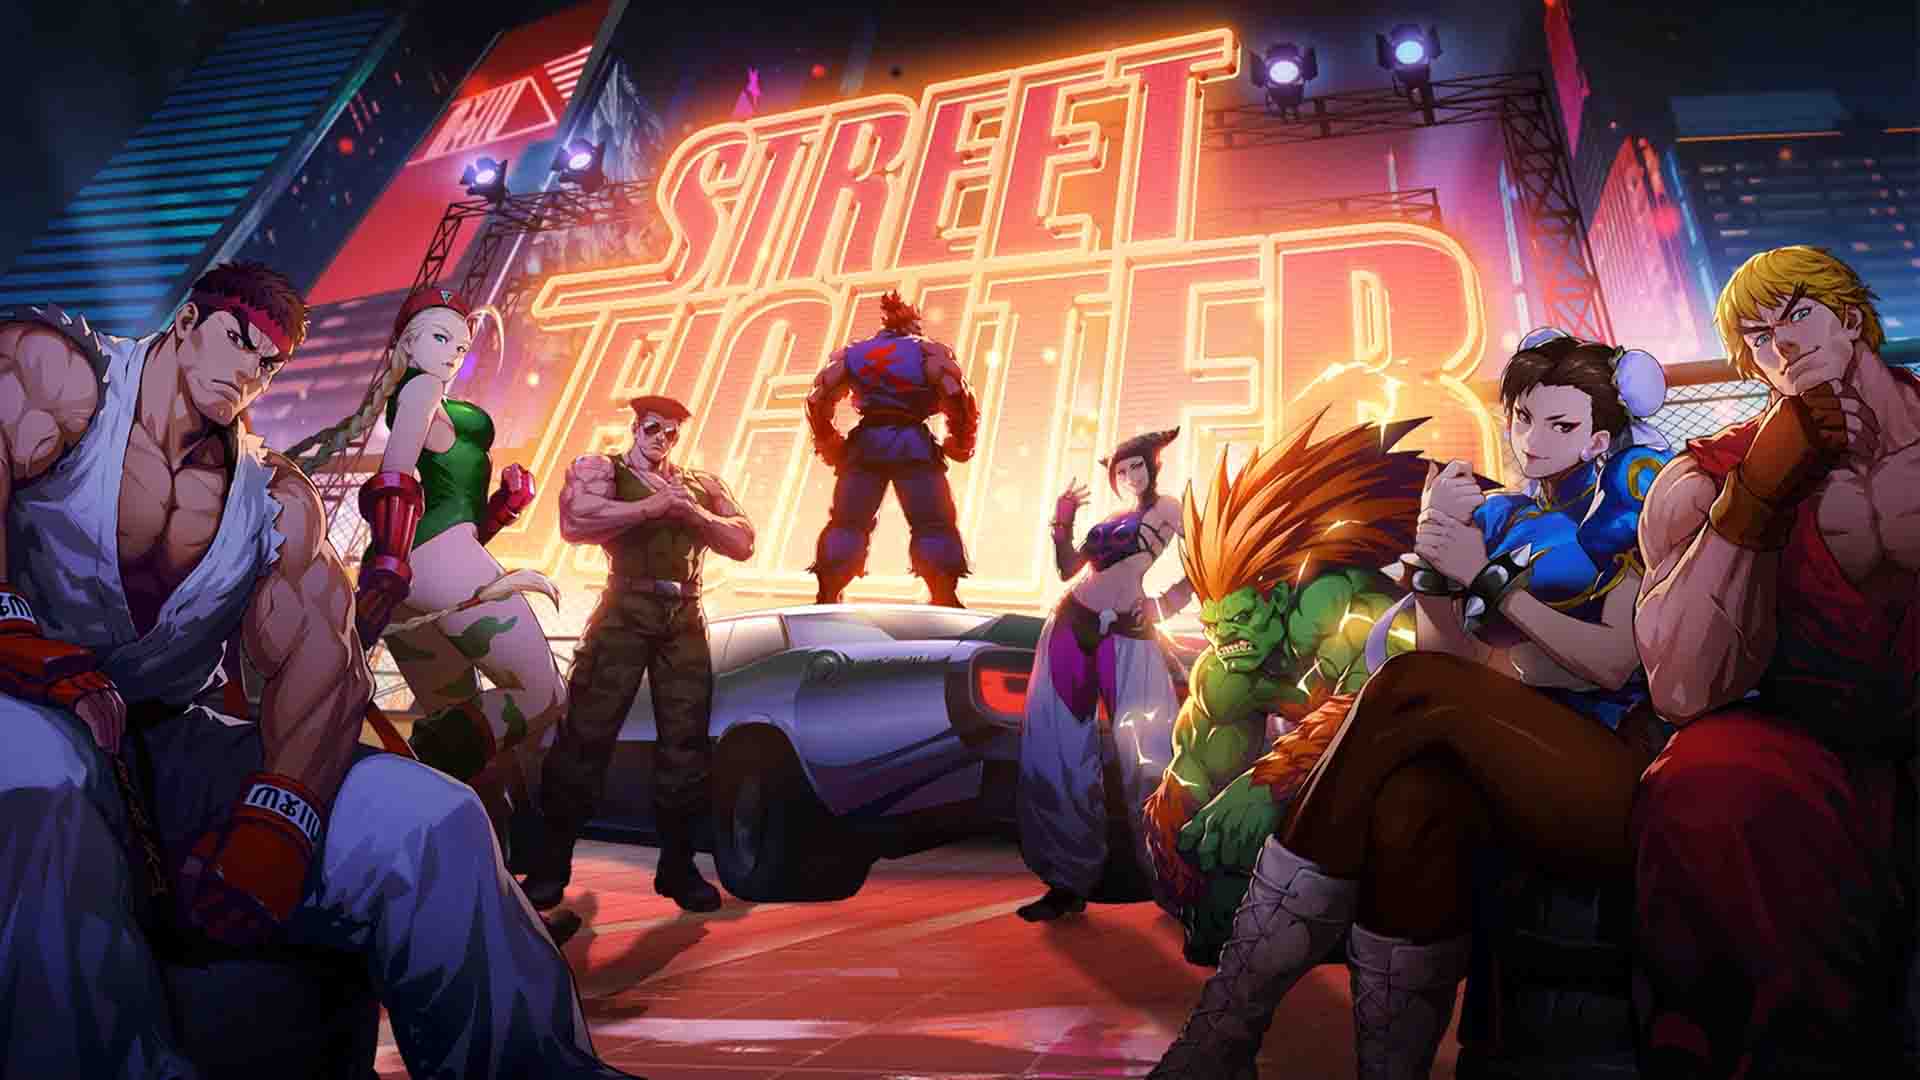 Street Fighter: Duel gets a new announcement trailer